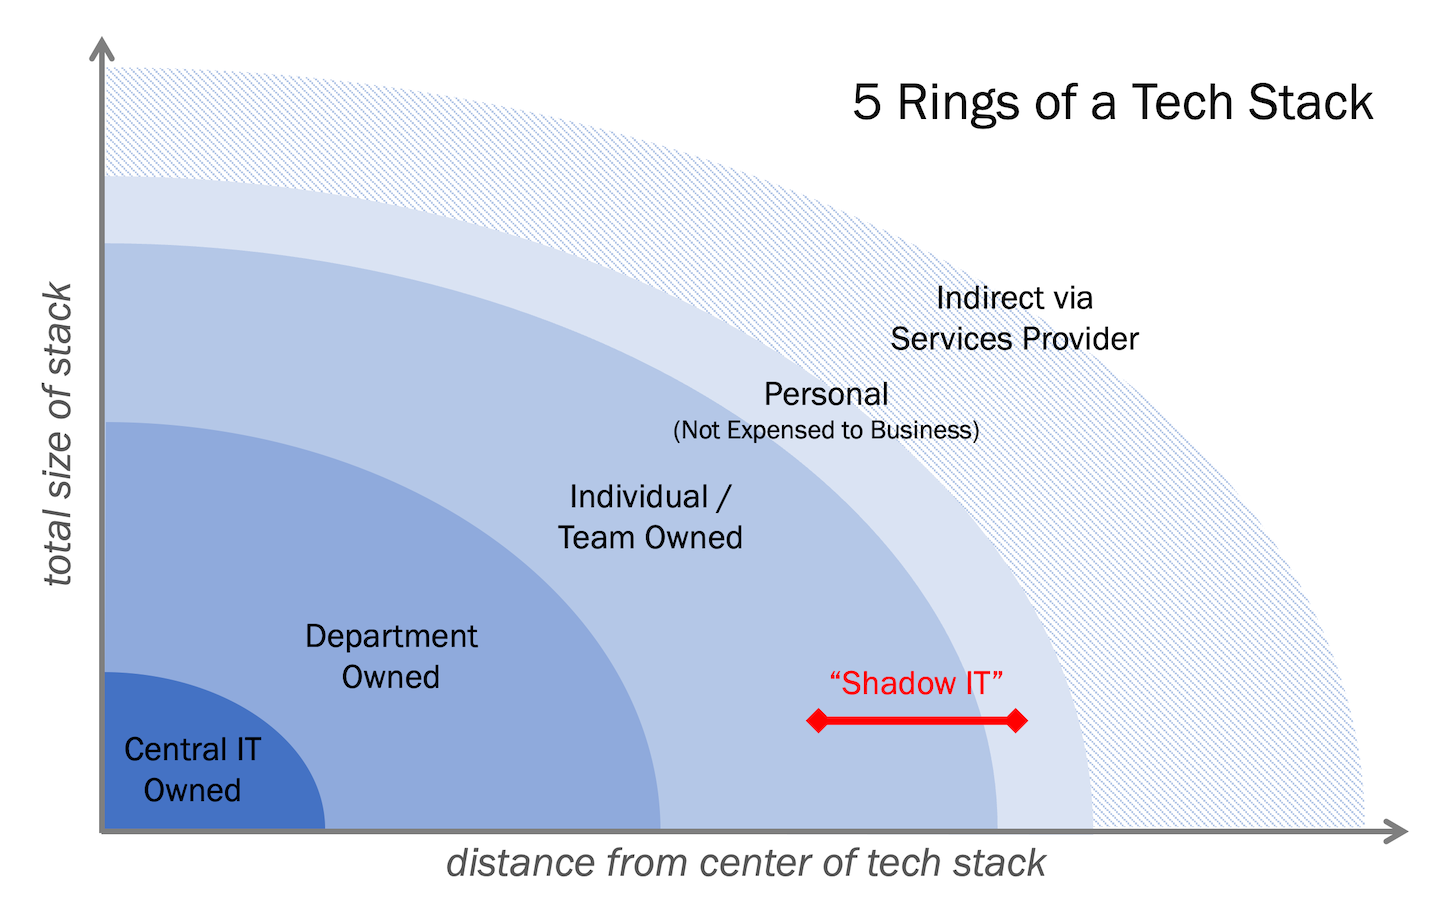 5 Rings of a Tech Stack